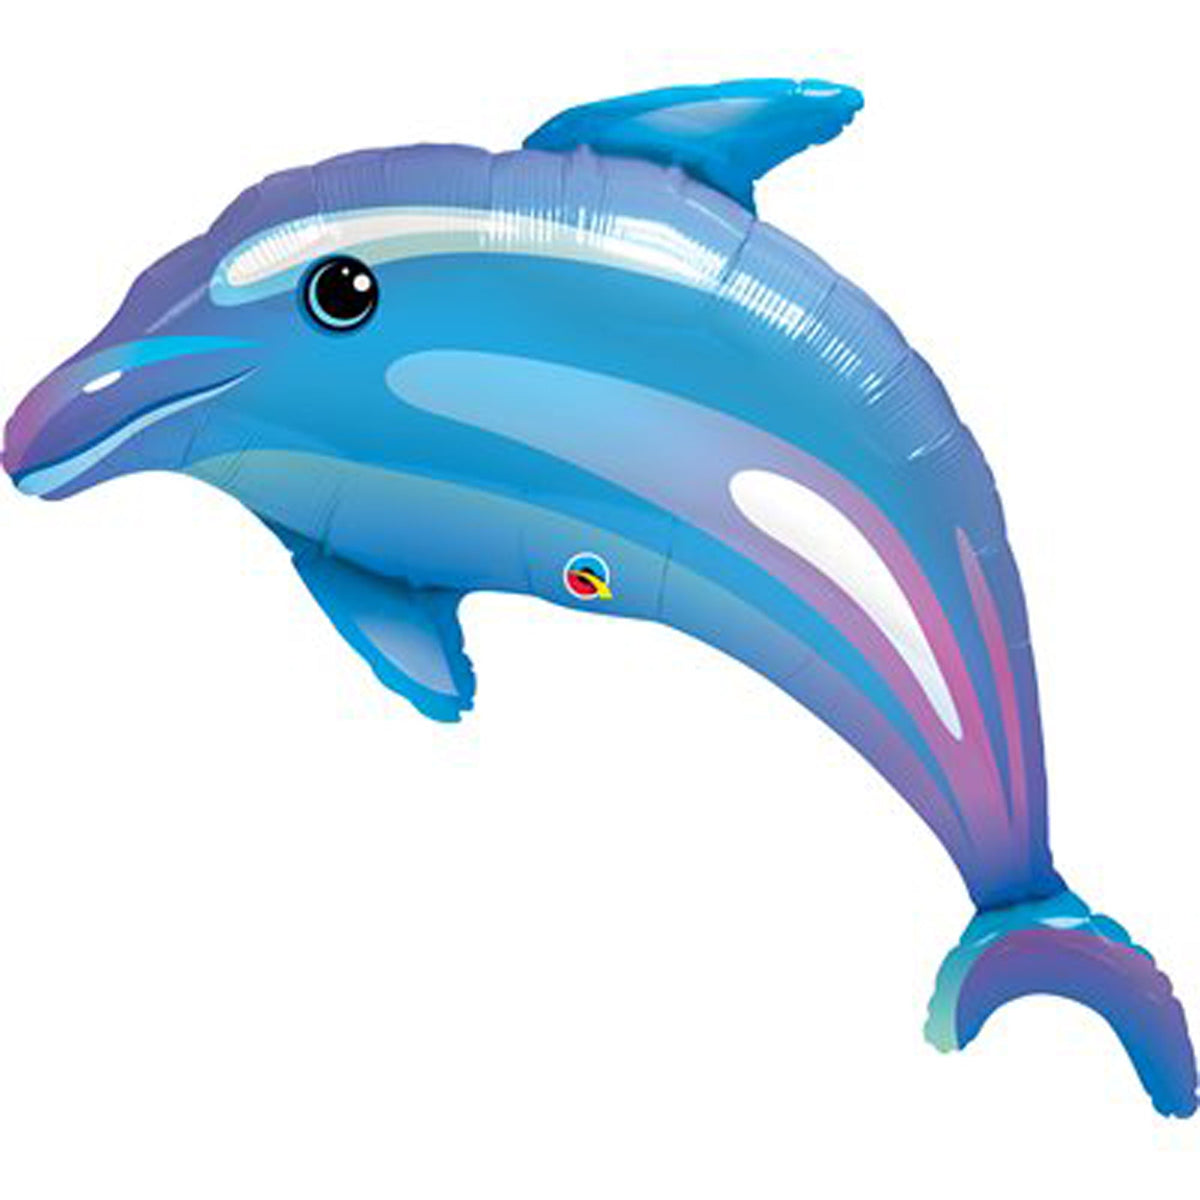 LE GROUPE BLC INTL INC Balloons Dolphin Supershape Foil Balloon, 42 Inches